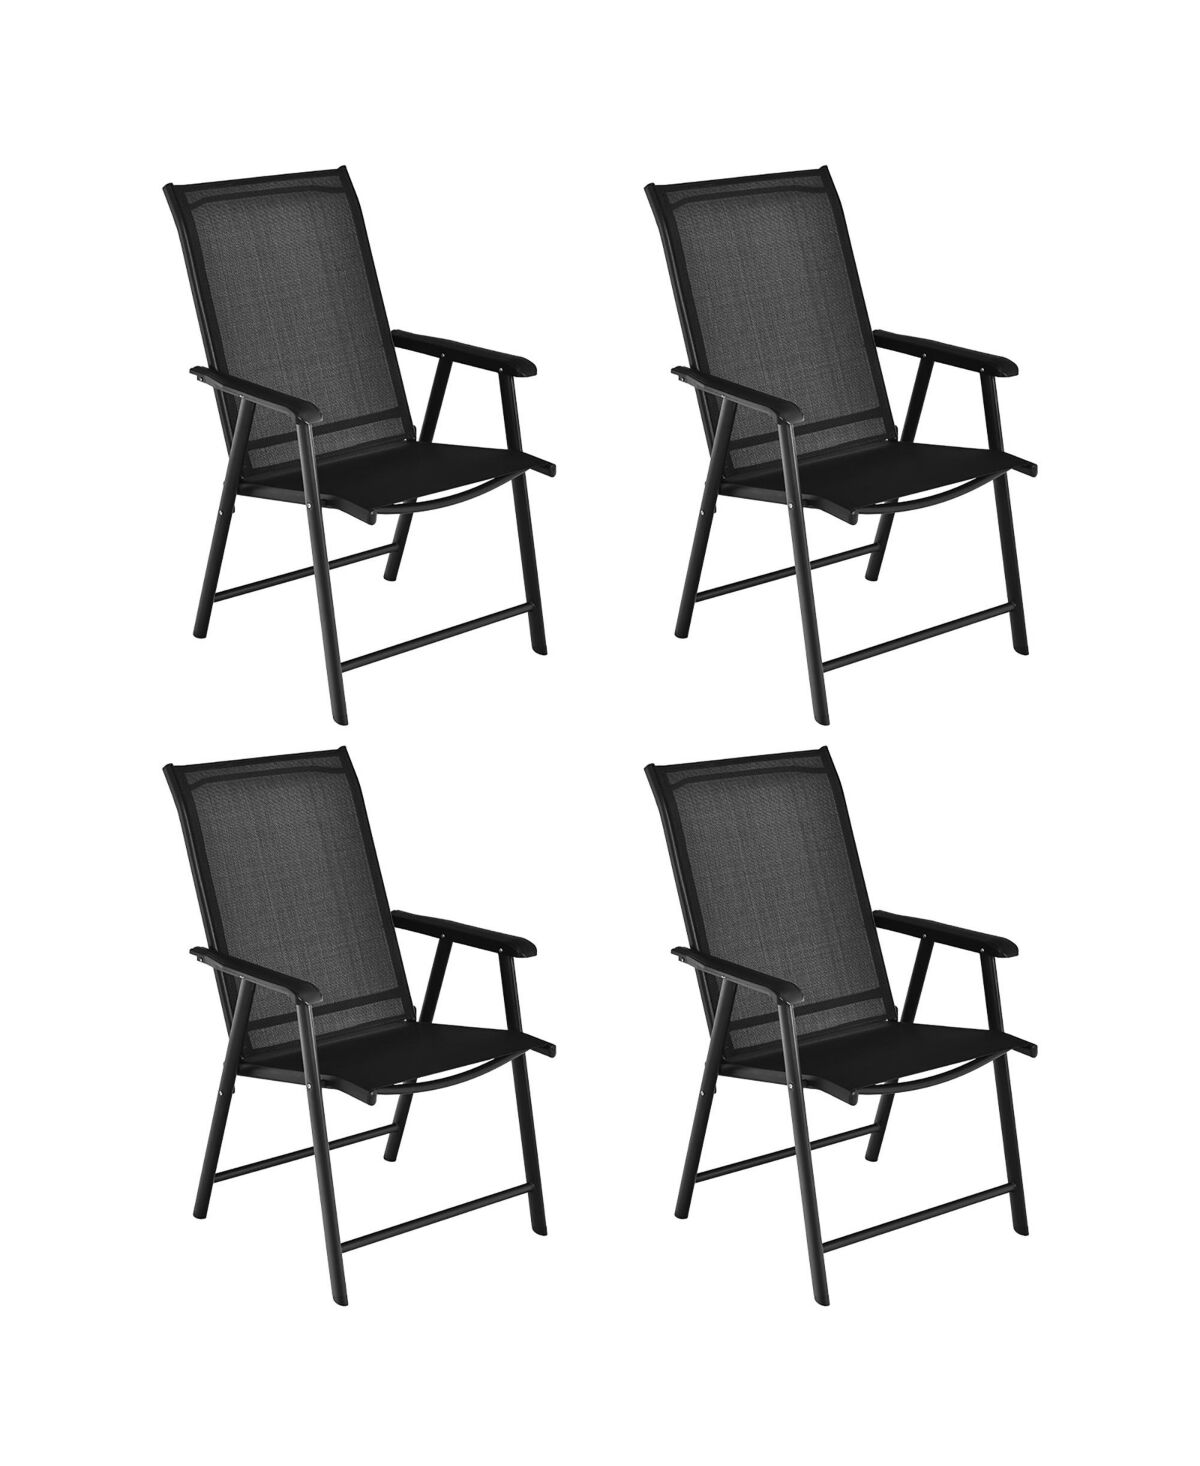 Costway 4PCS Patio Folding Dining Chairs Portable Camping Armrest Garden - Black